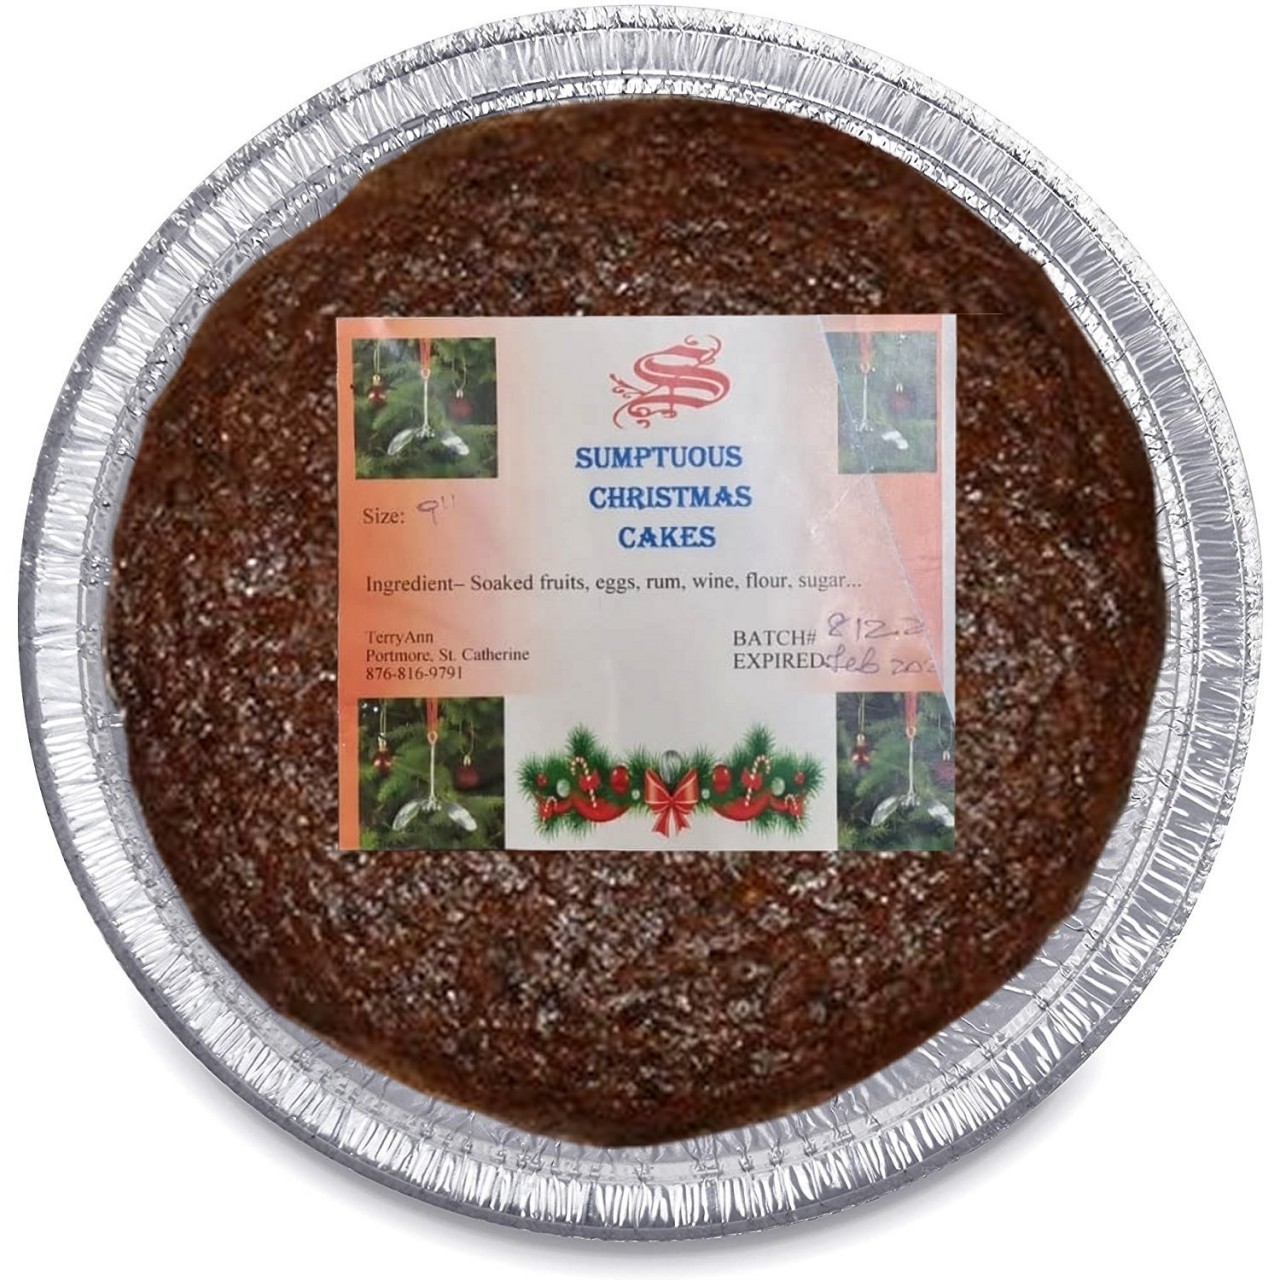 SUMPTUOUS CHRISTMAS CAKE 9in